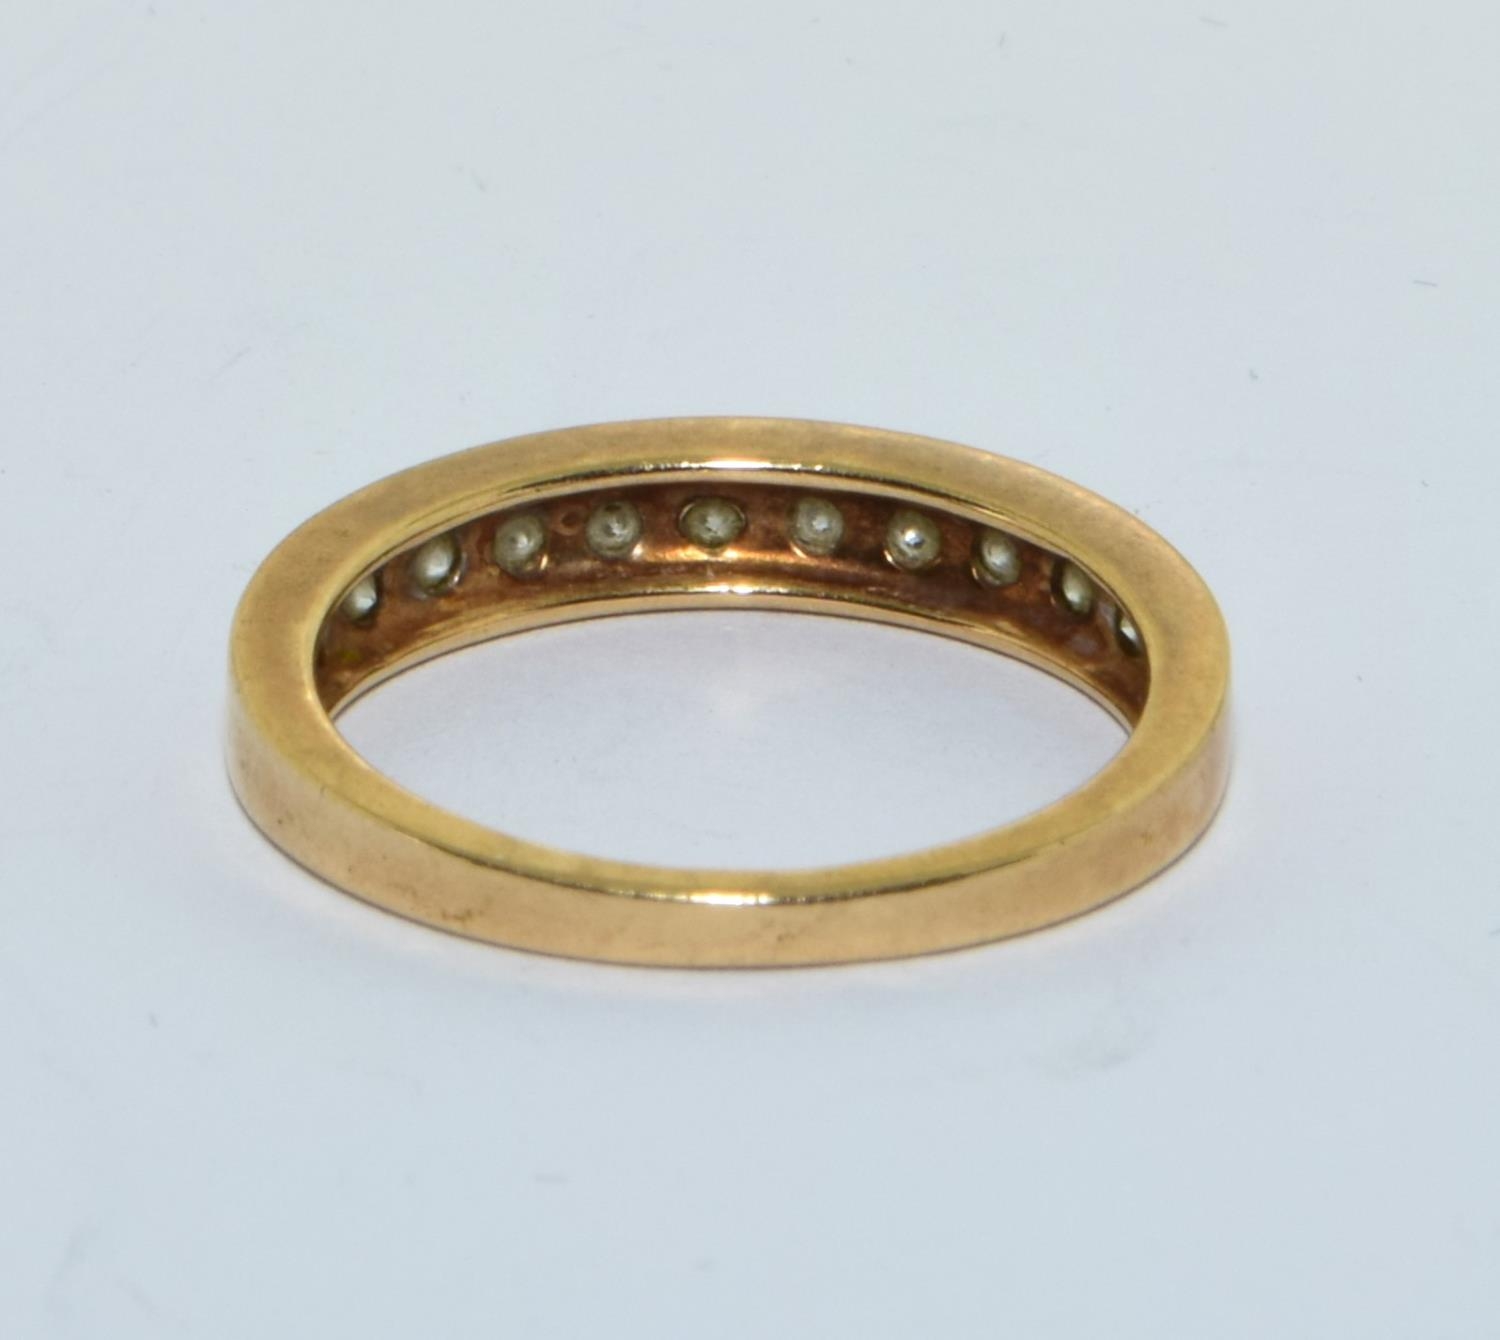 9ct gold ladies Diamond 1/2 eternity ring hall marked in ring as 0.25ct size N - Image 3 of 5